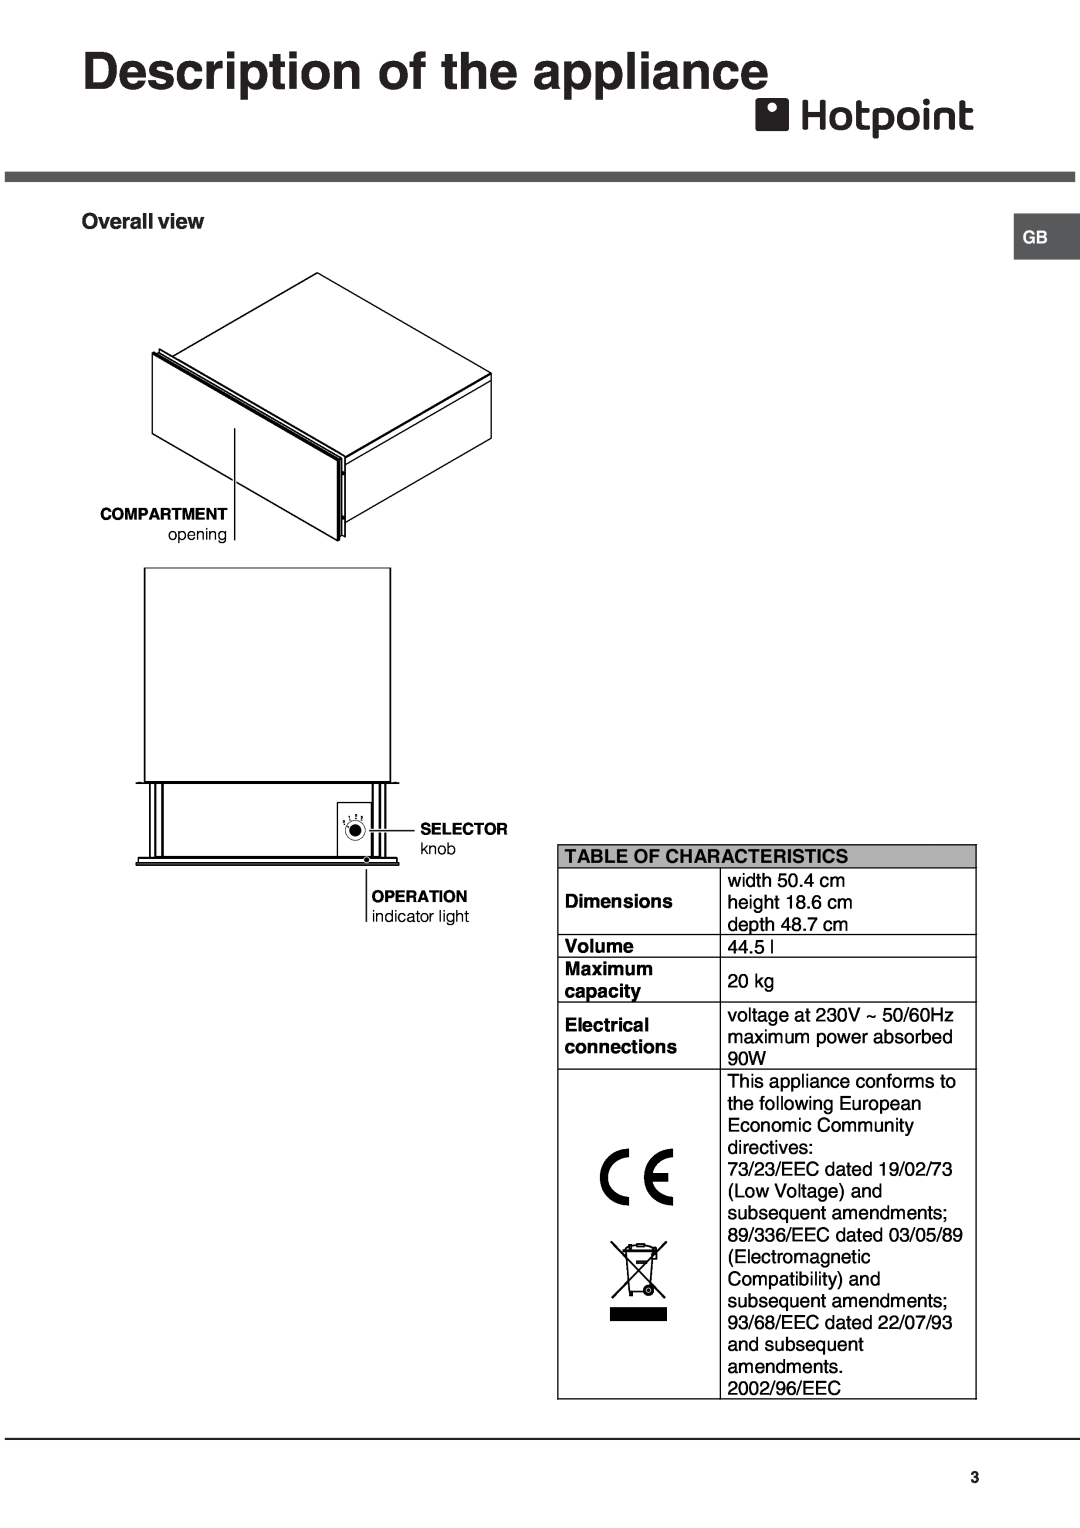 Hotpoint HWD24X Description of the appliance, Overall view, Table Of Characteristics, Dimensions Volume Maximum capacity 